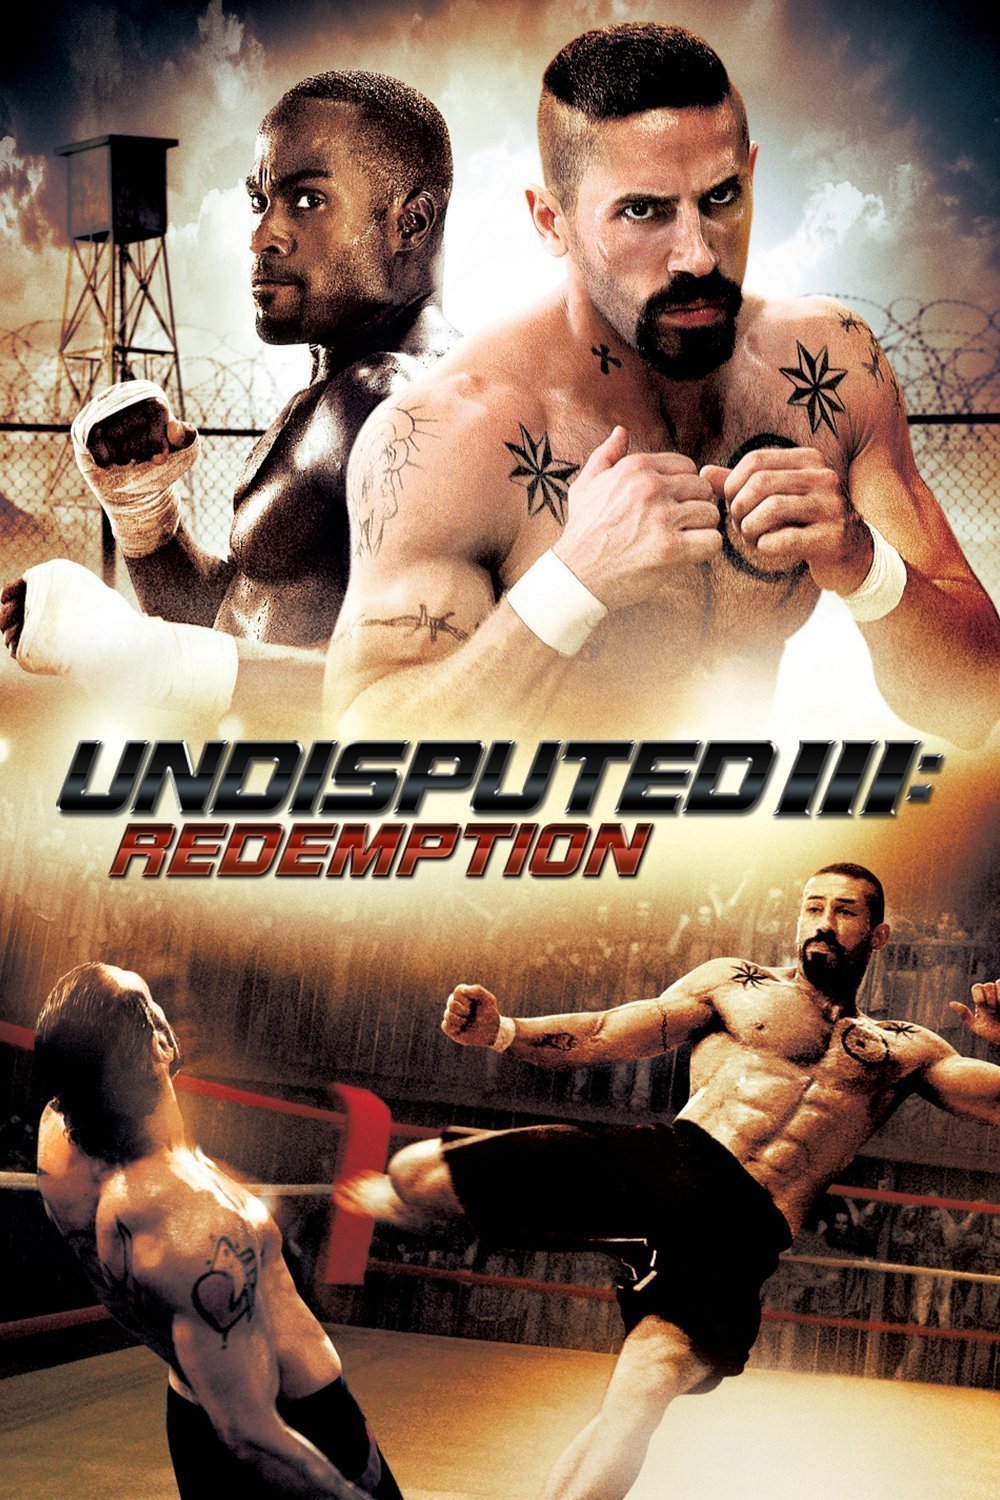 Poster of the movie Undisputed III: Redemption